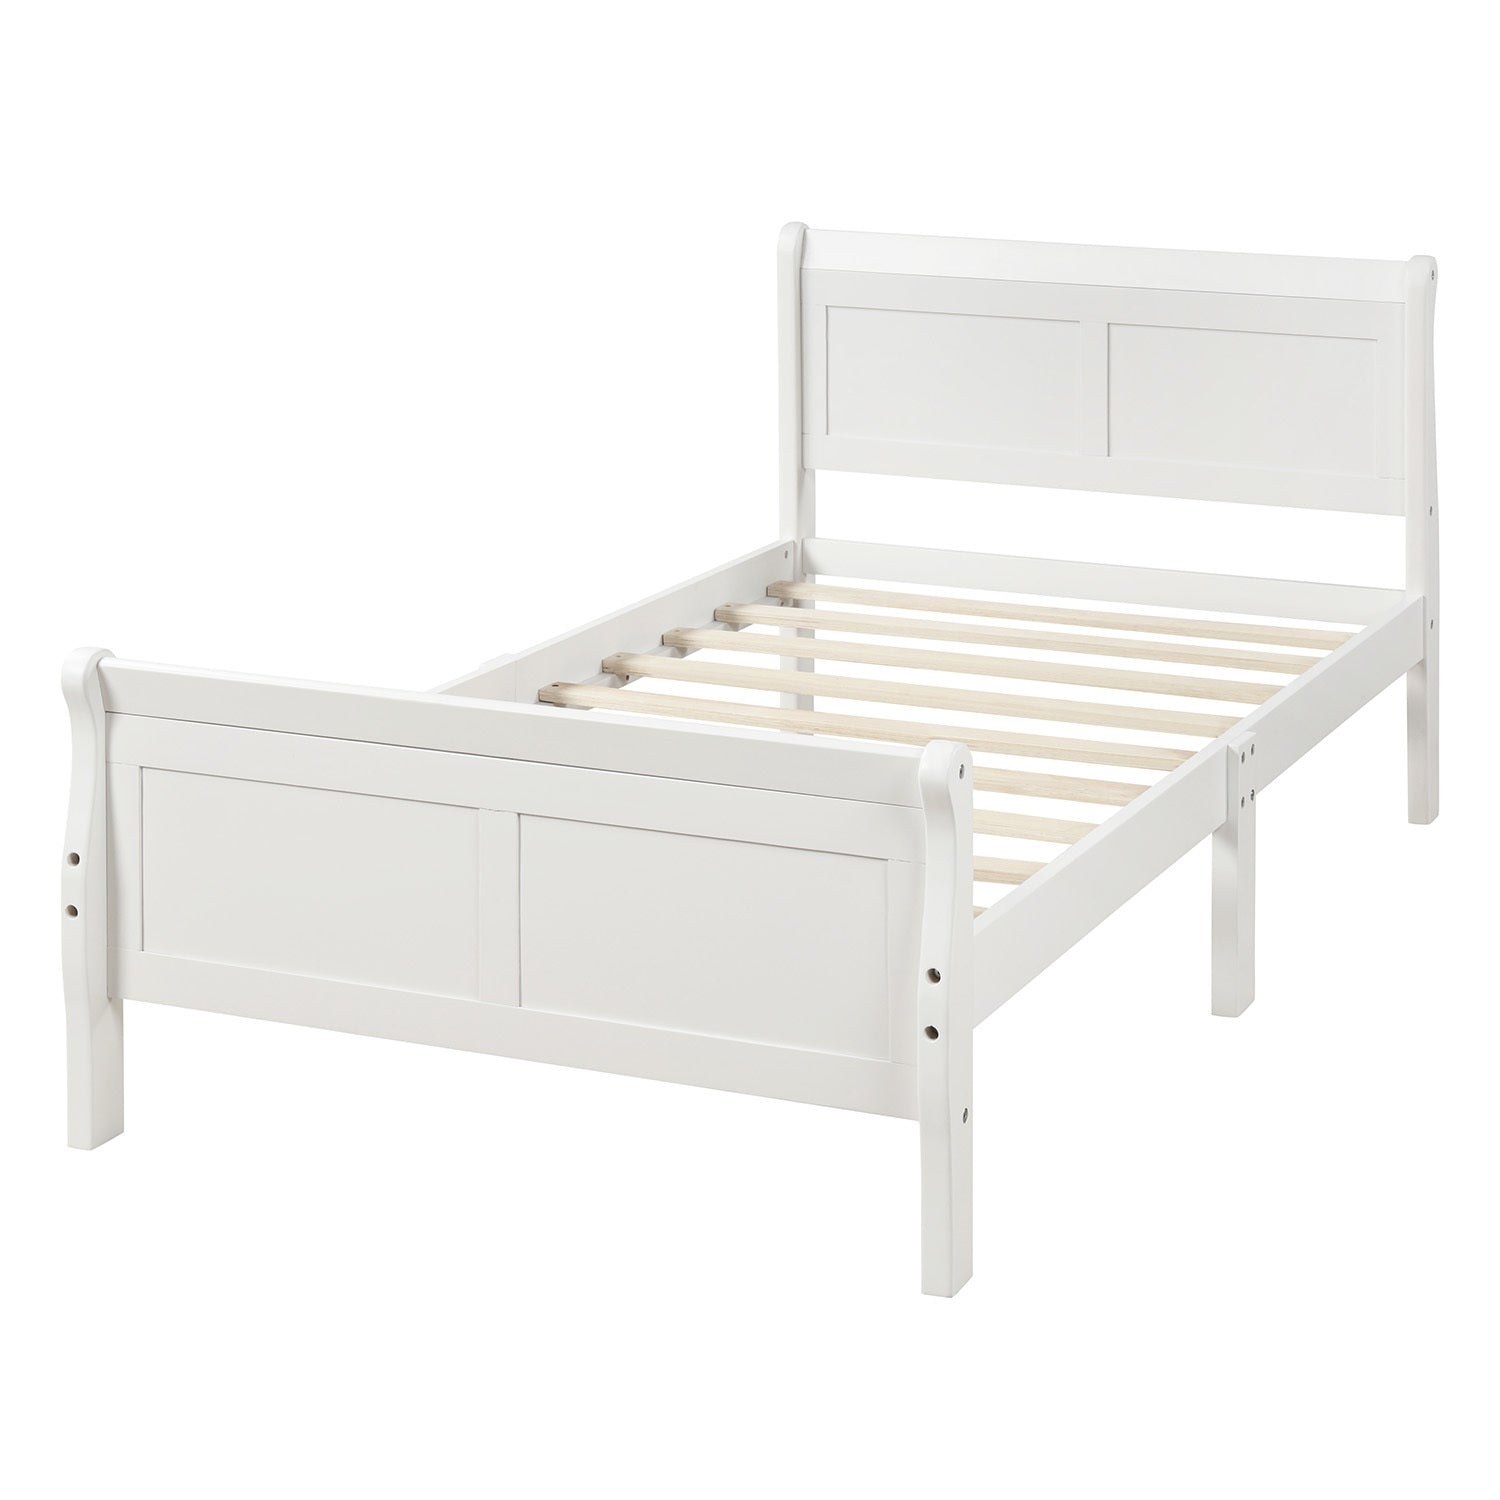 Wooden Twin Sleigh Bed Frame with Headboard, Footboard and wood slat By: Alabama Beds